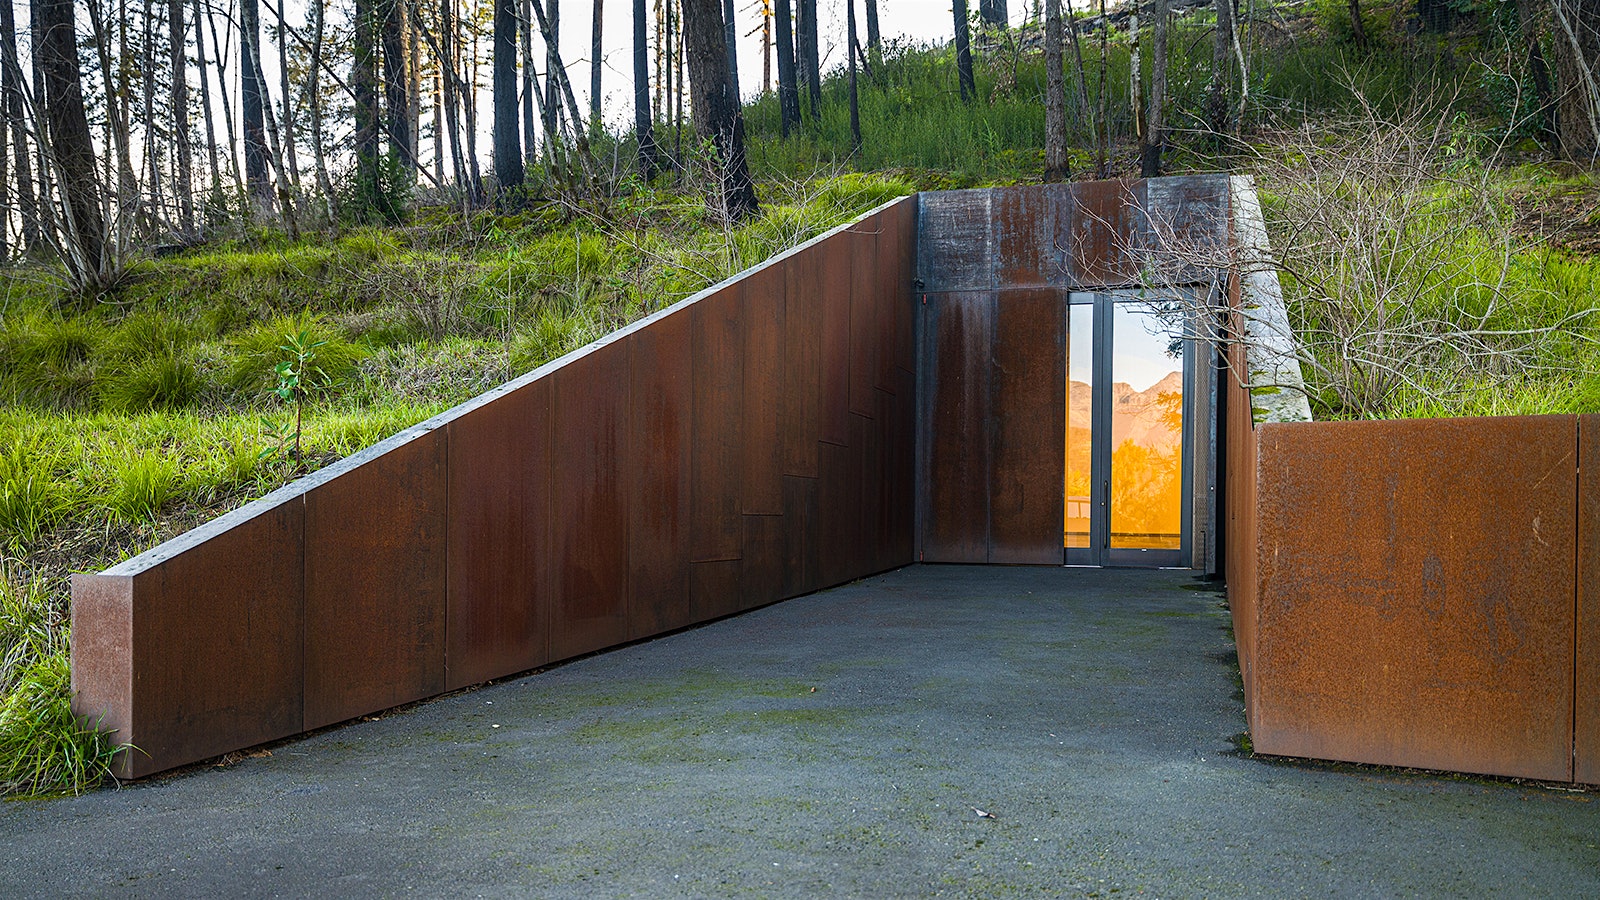  Exterior of the art cave on the former Stonescape estate, built into a wooded hillside and framed by dark wood